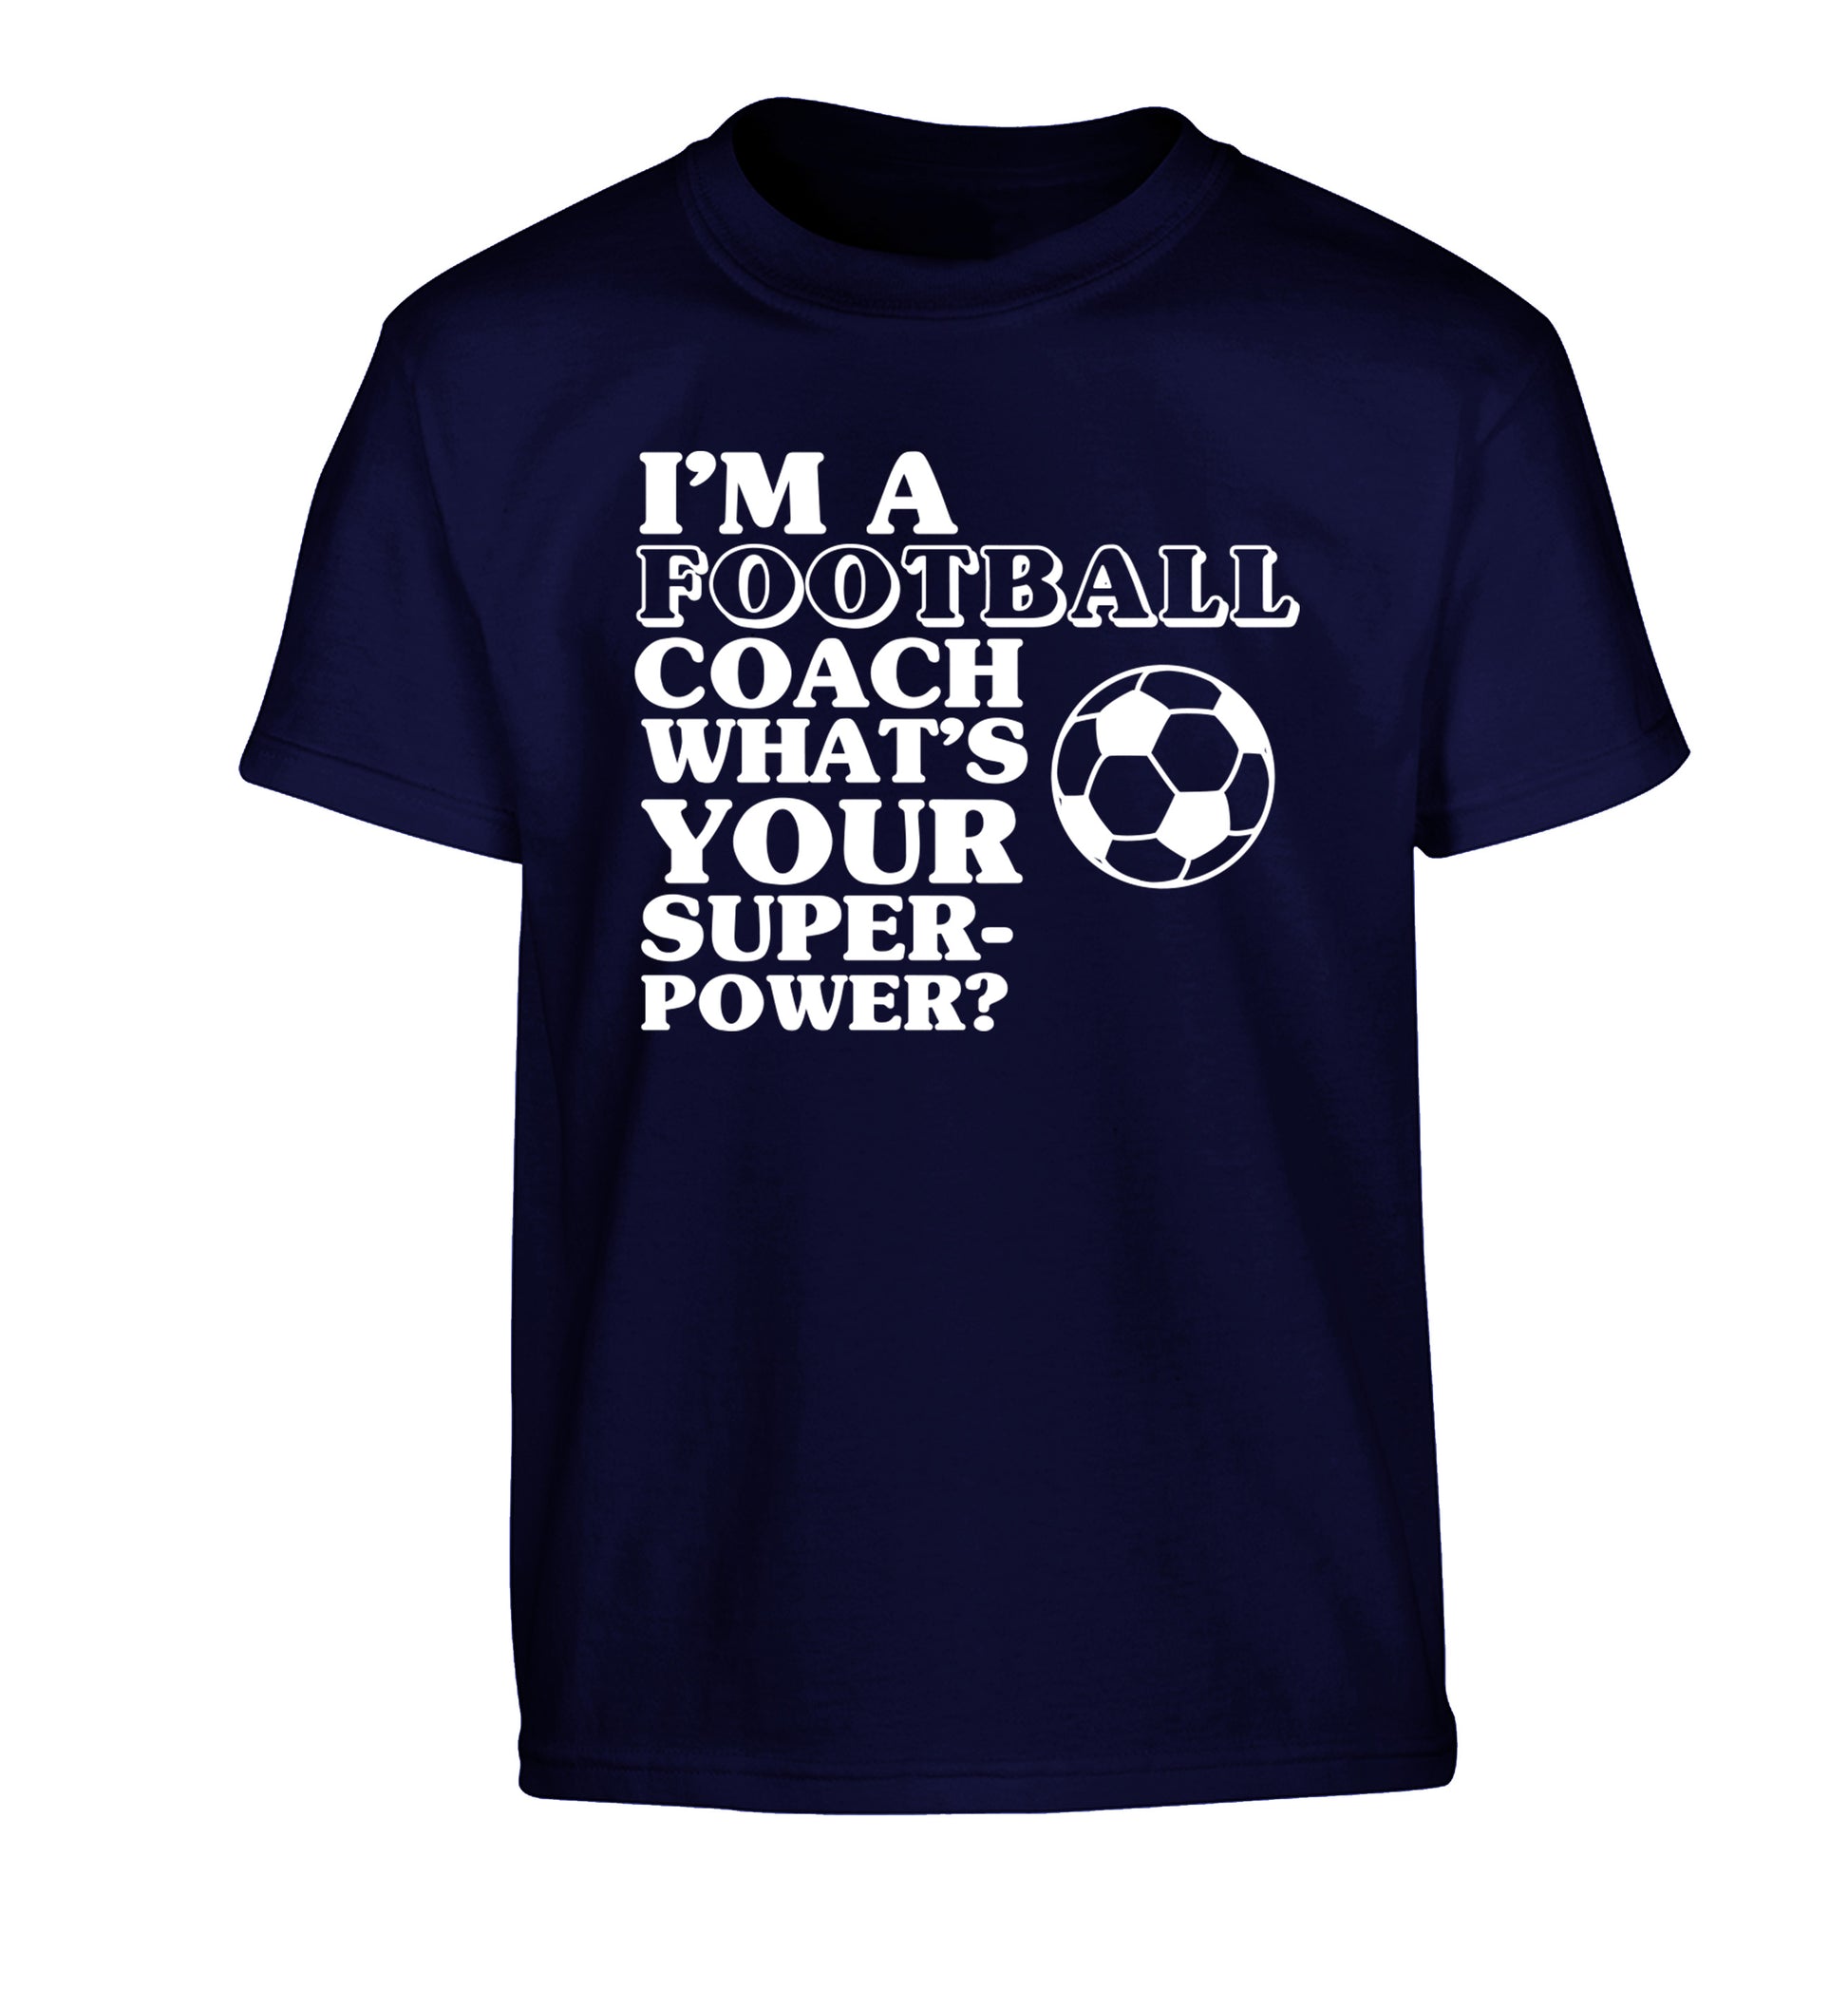 I'm a football coach what's your superpower? Children's navy Tshirt 12-14 Years